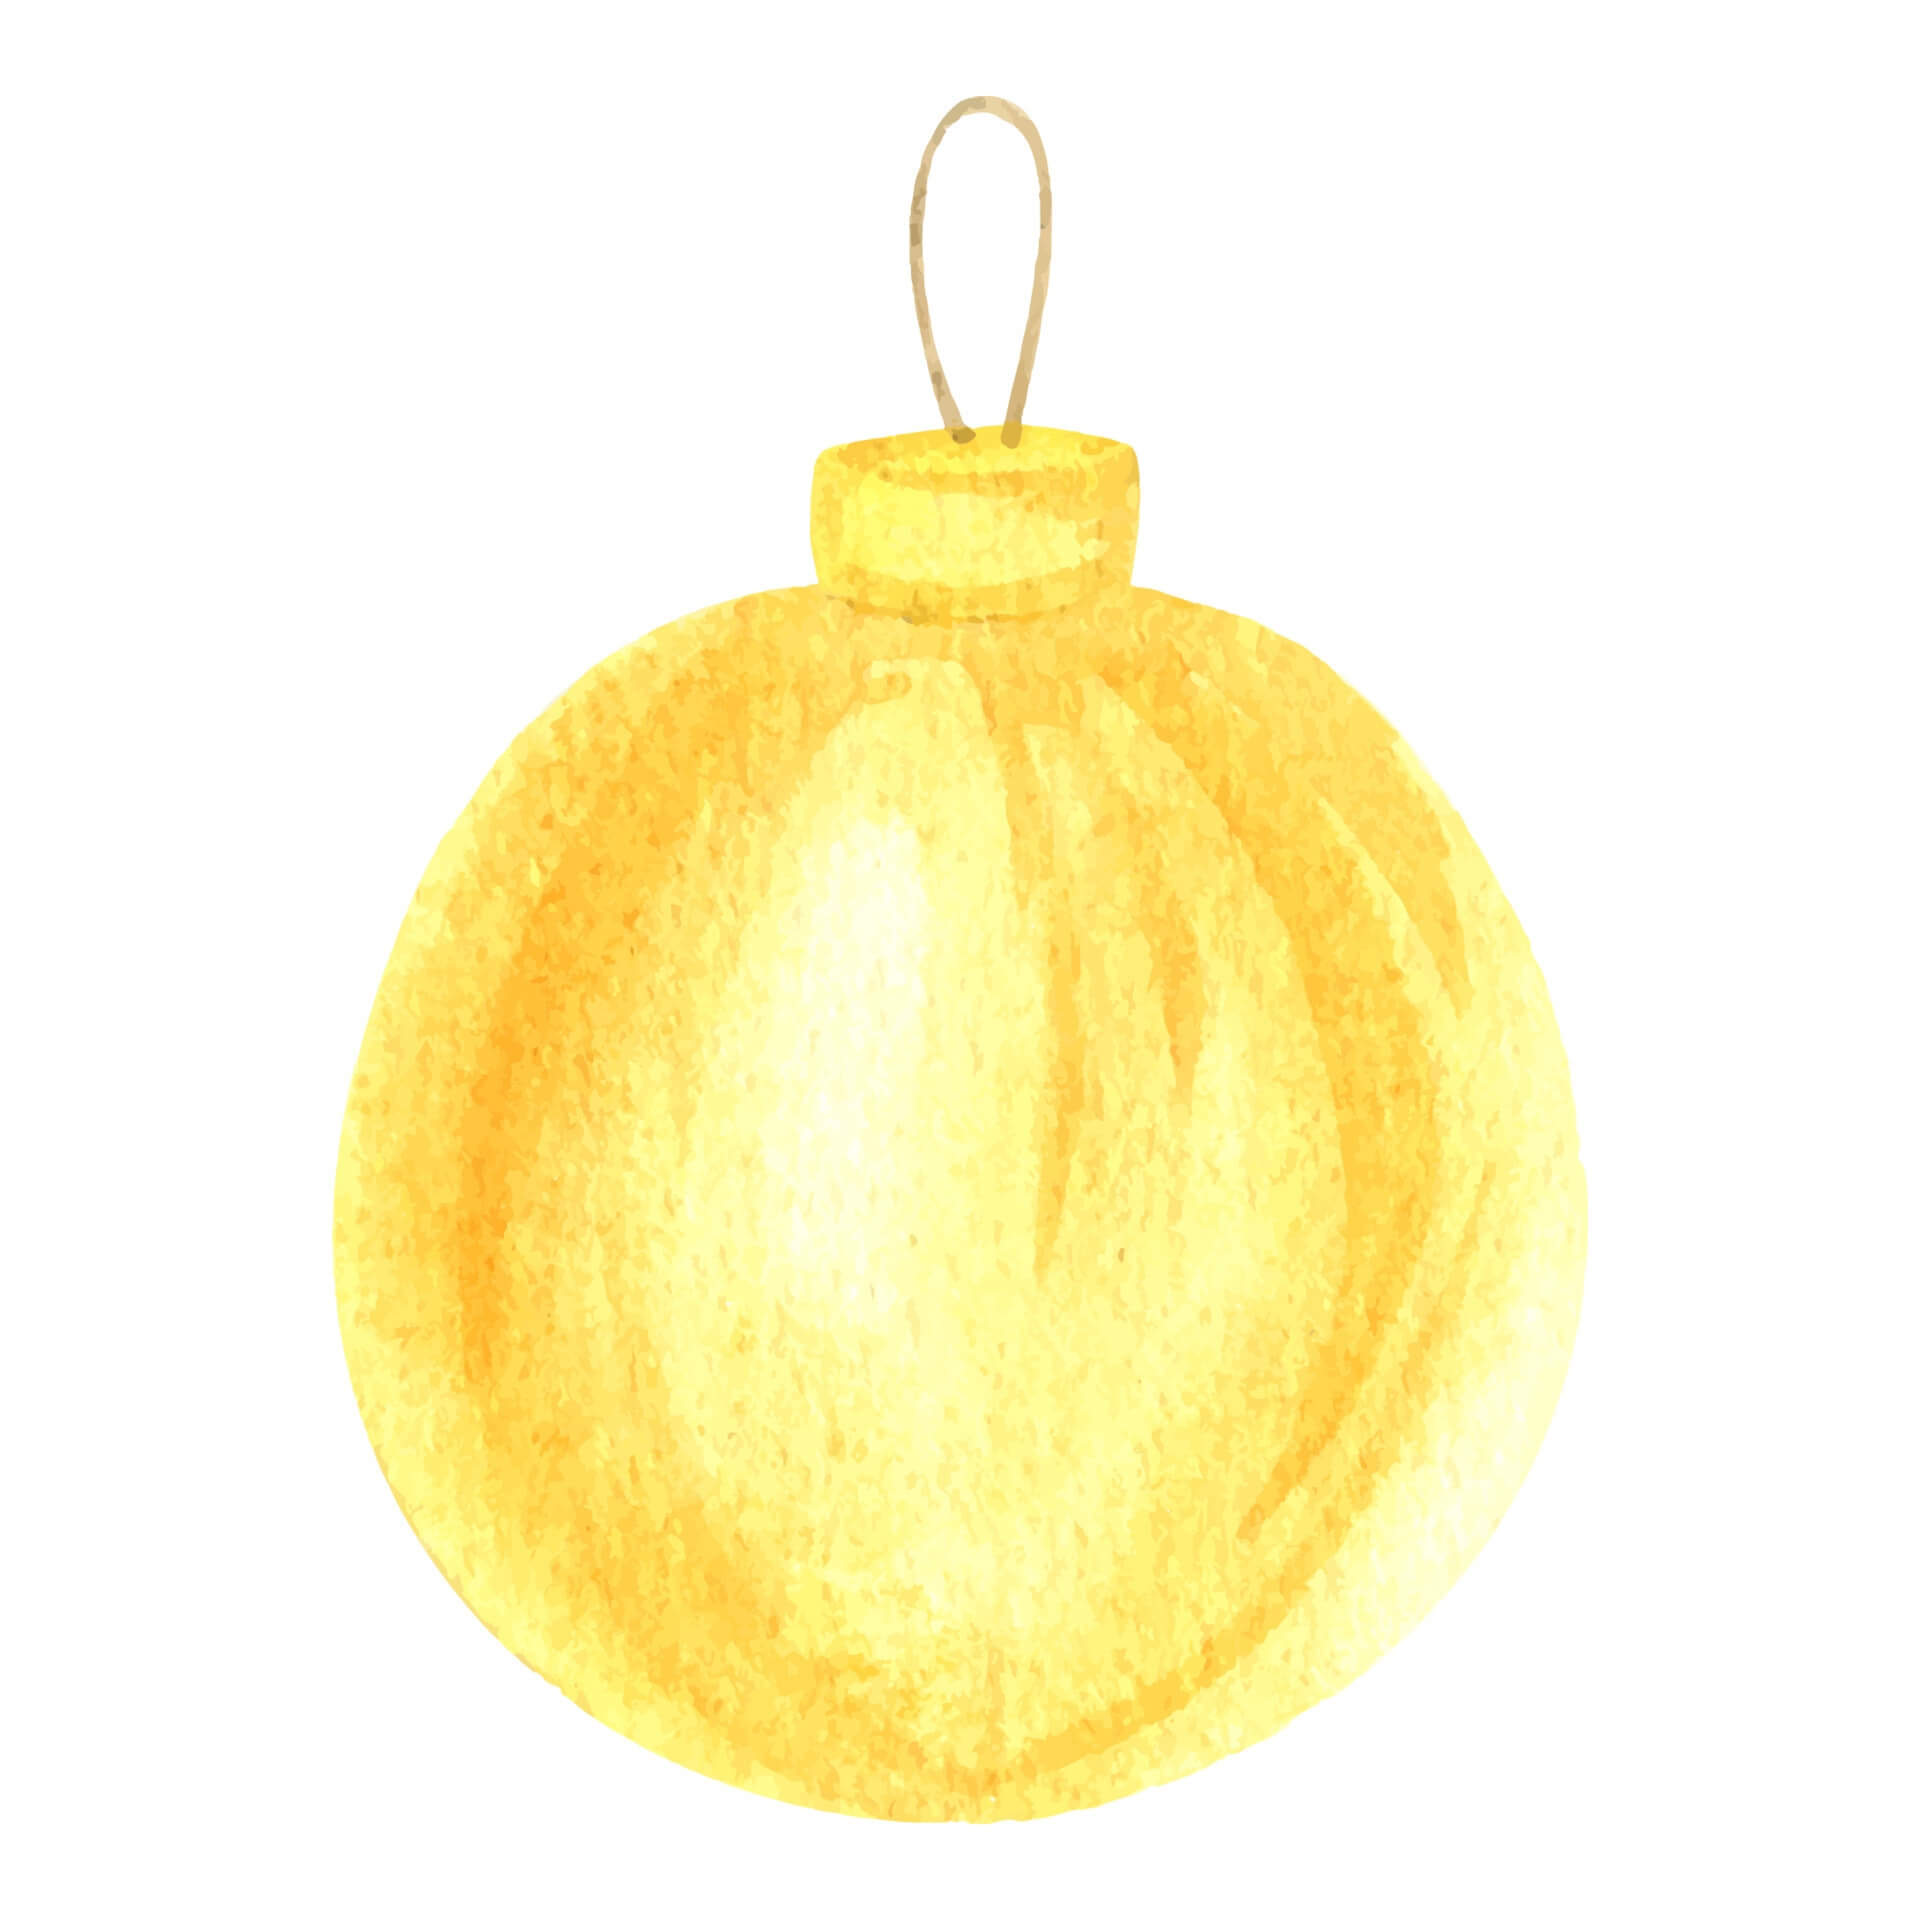 Shining Gold Watercolor Christmas Balls Craft For Kids To PaintPainting Balls With Watercolor 